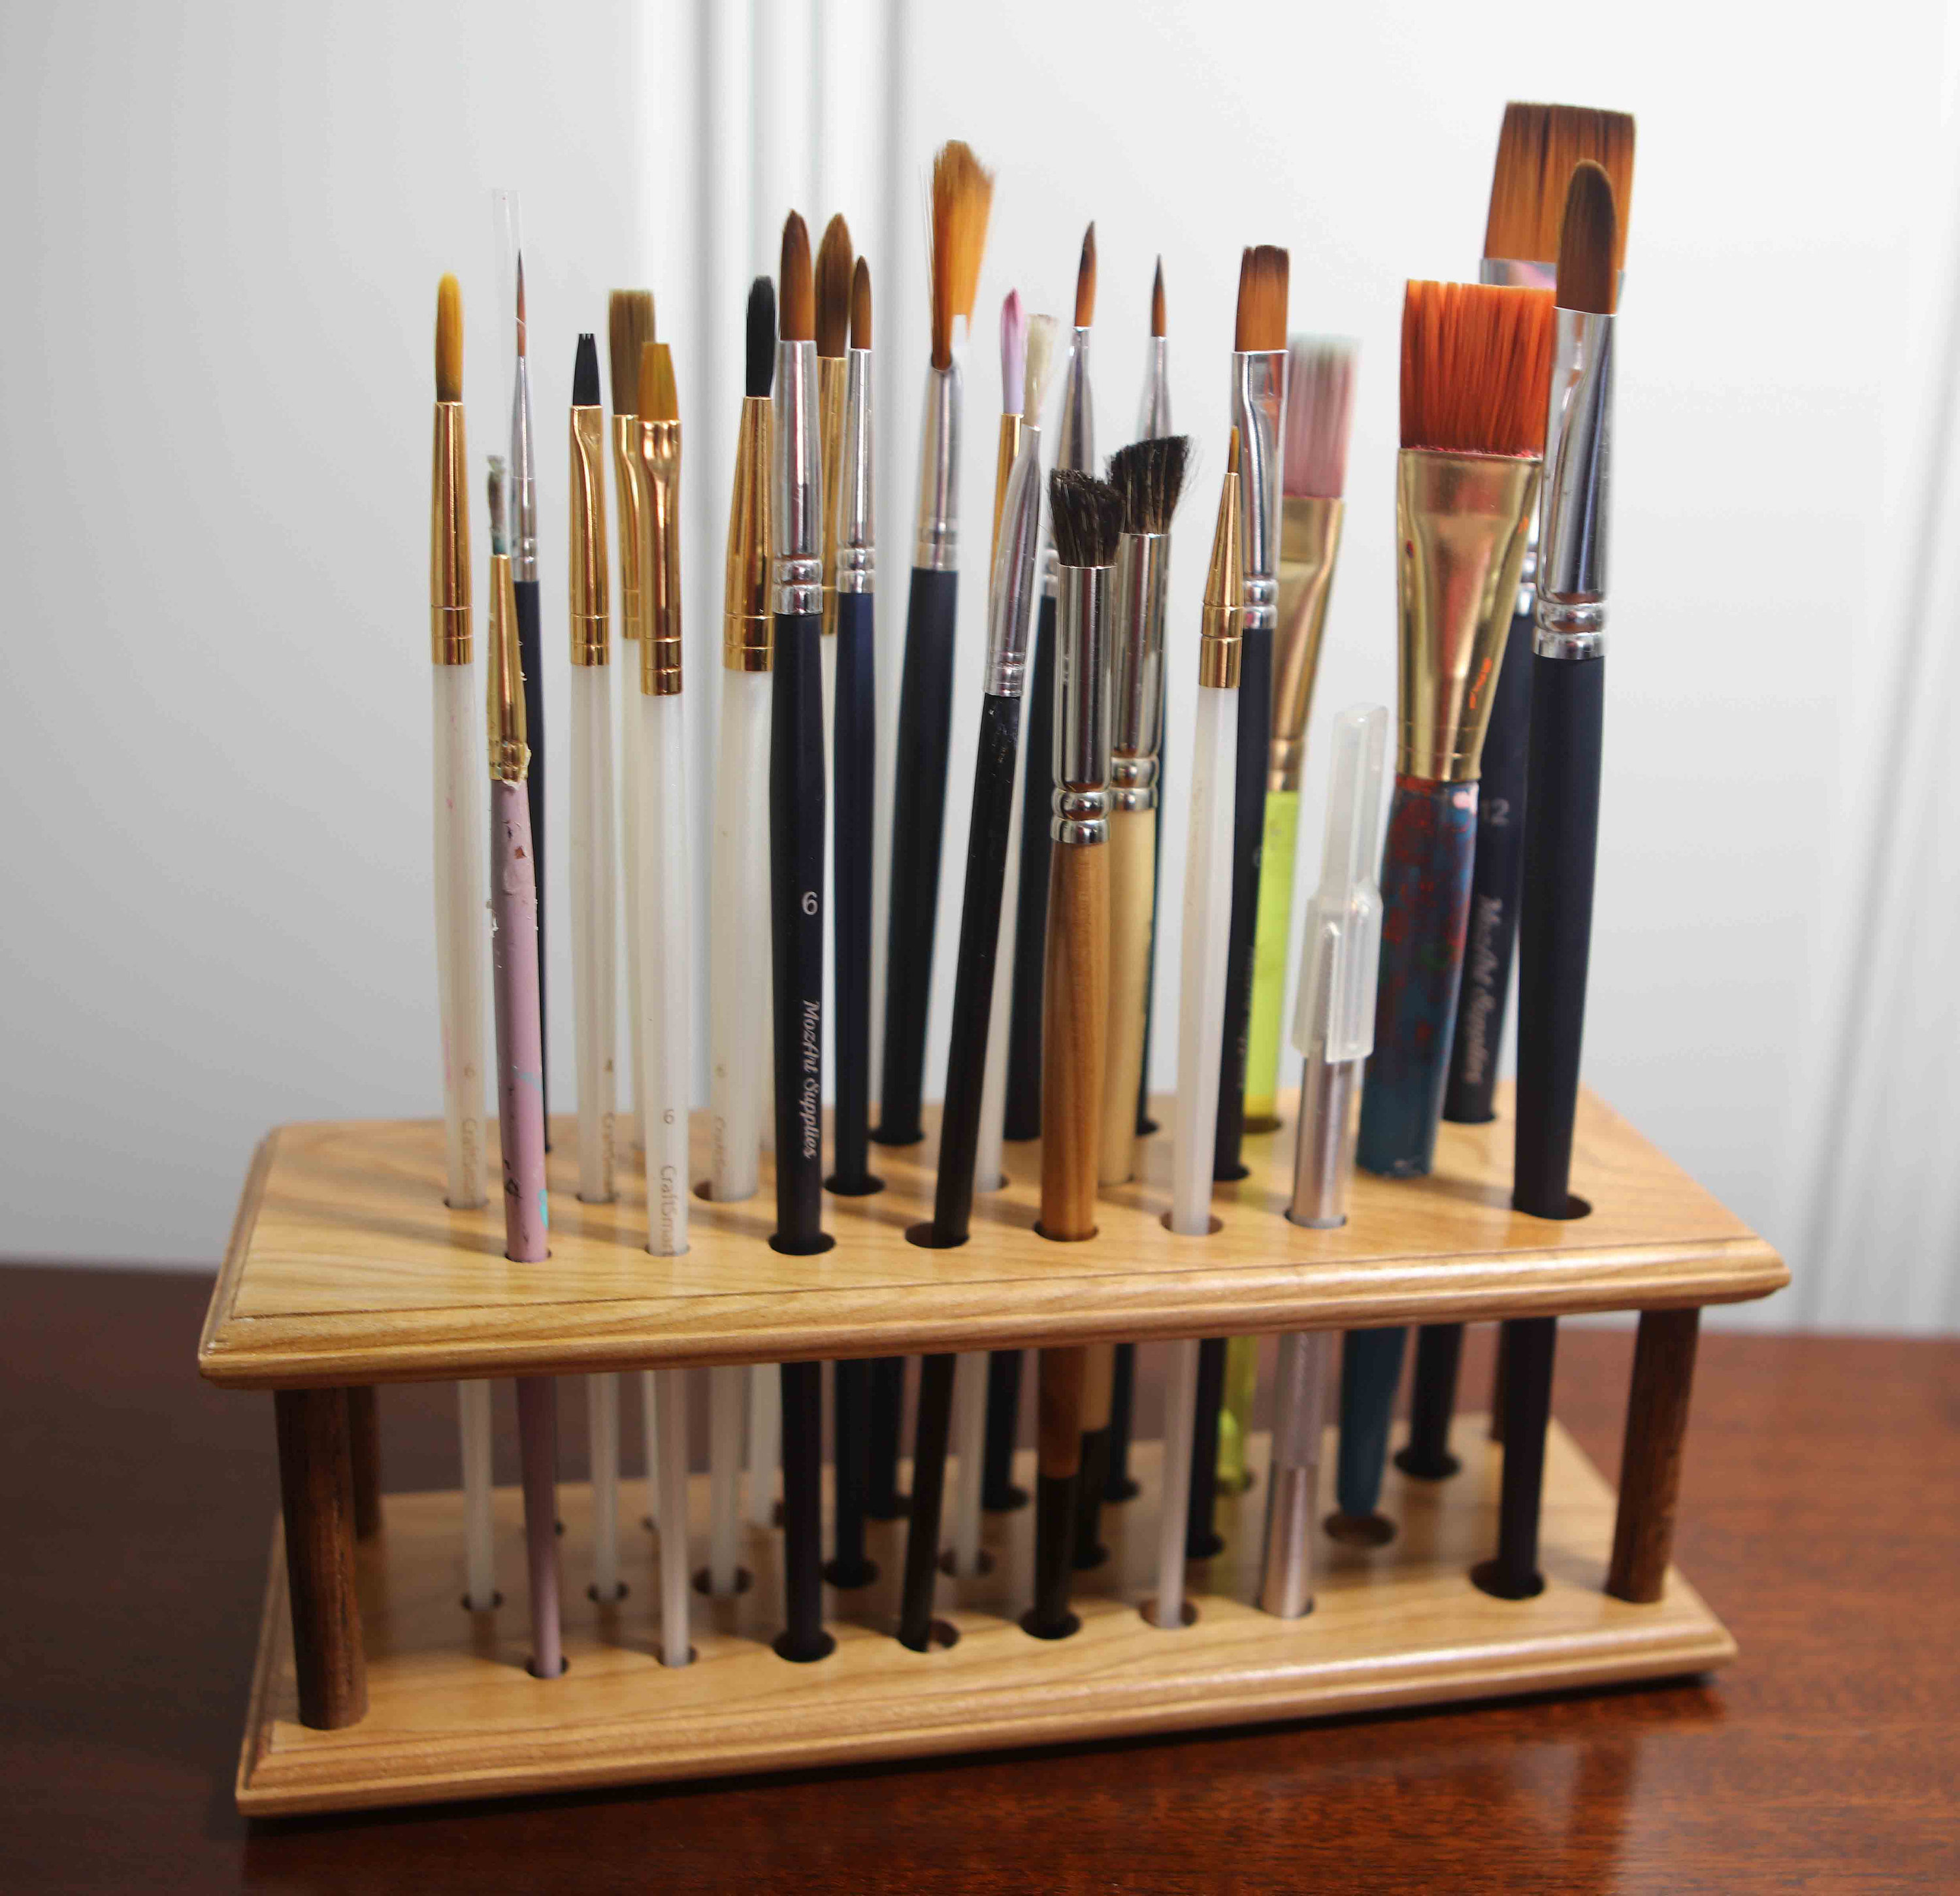 Paint Brush Holders Wooden Painting Pen Holder Stand Wooden Makeup